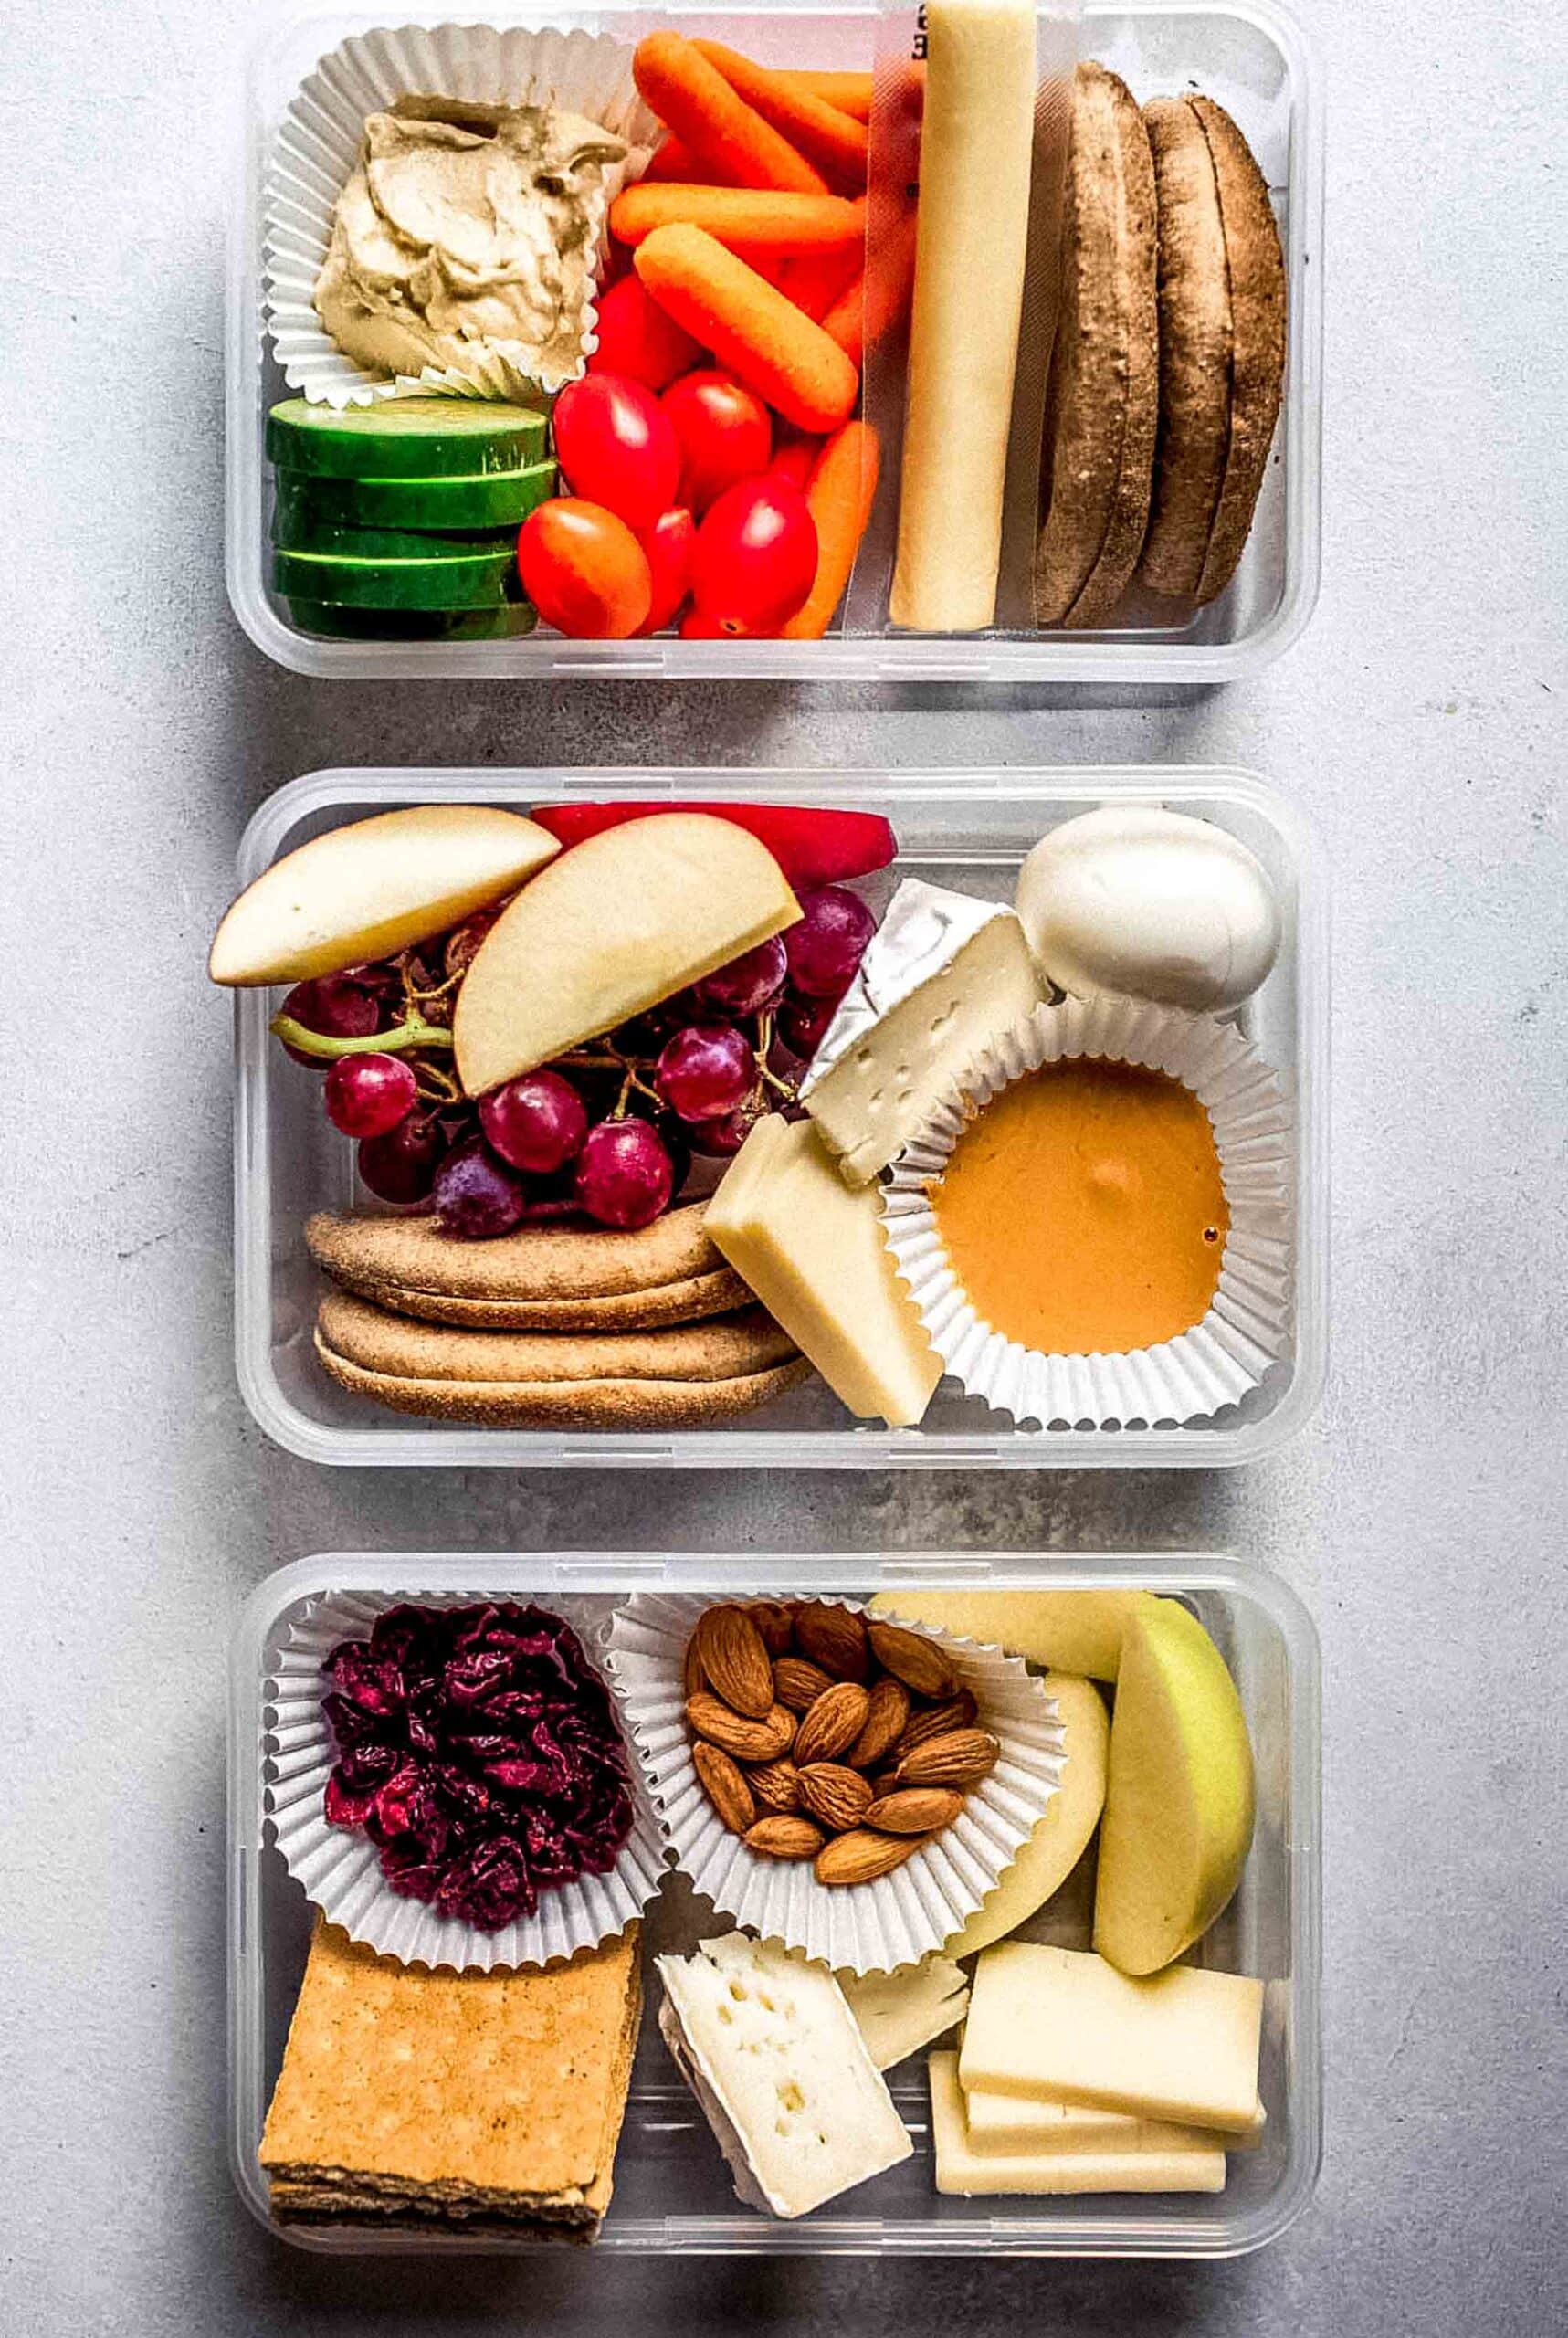 Three adult lunchables in small tupperwares.